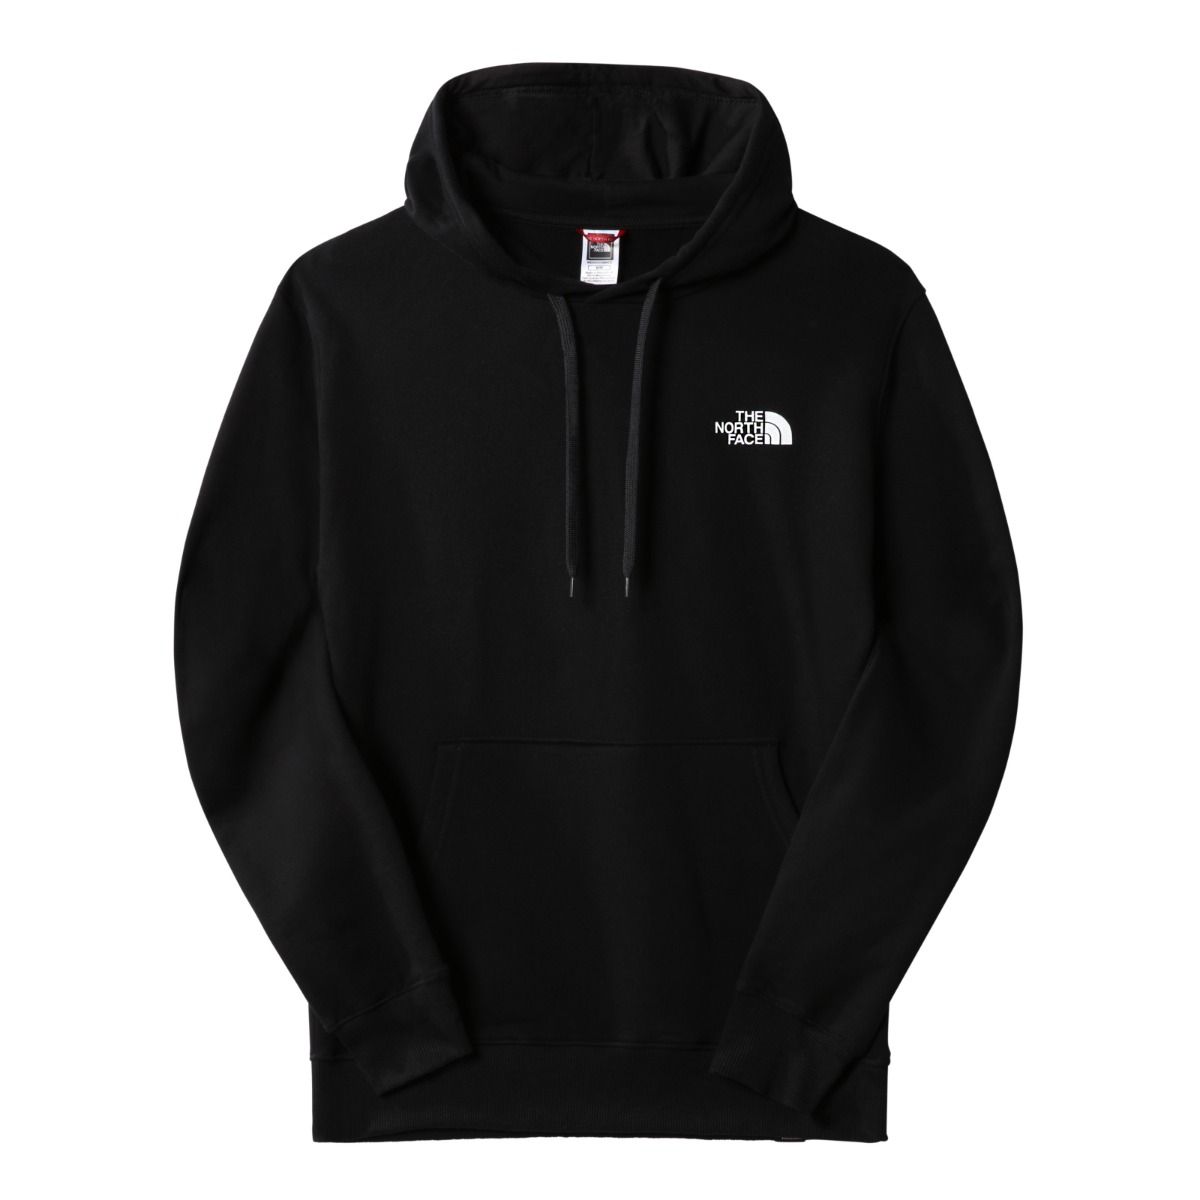 The North Face - Men’s Simple Dome Hoodie